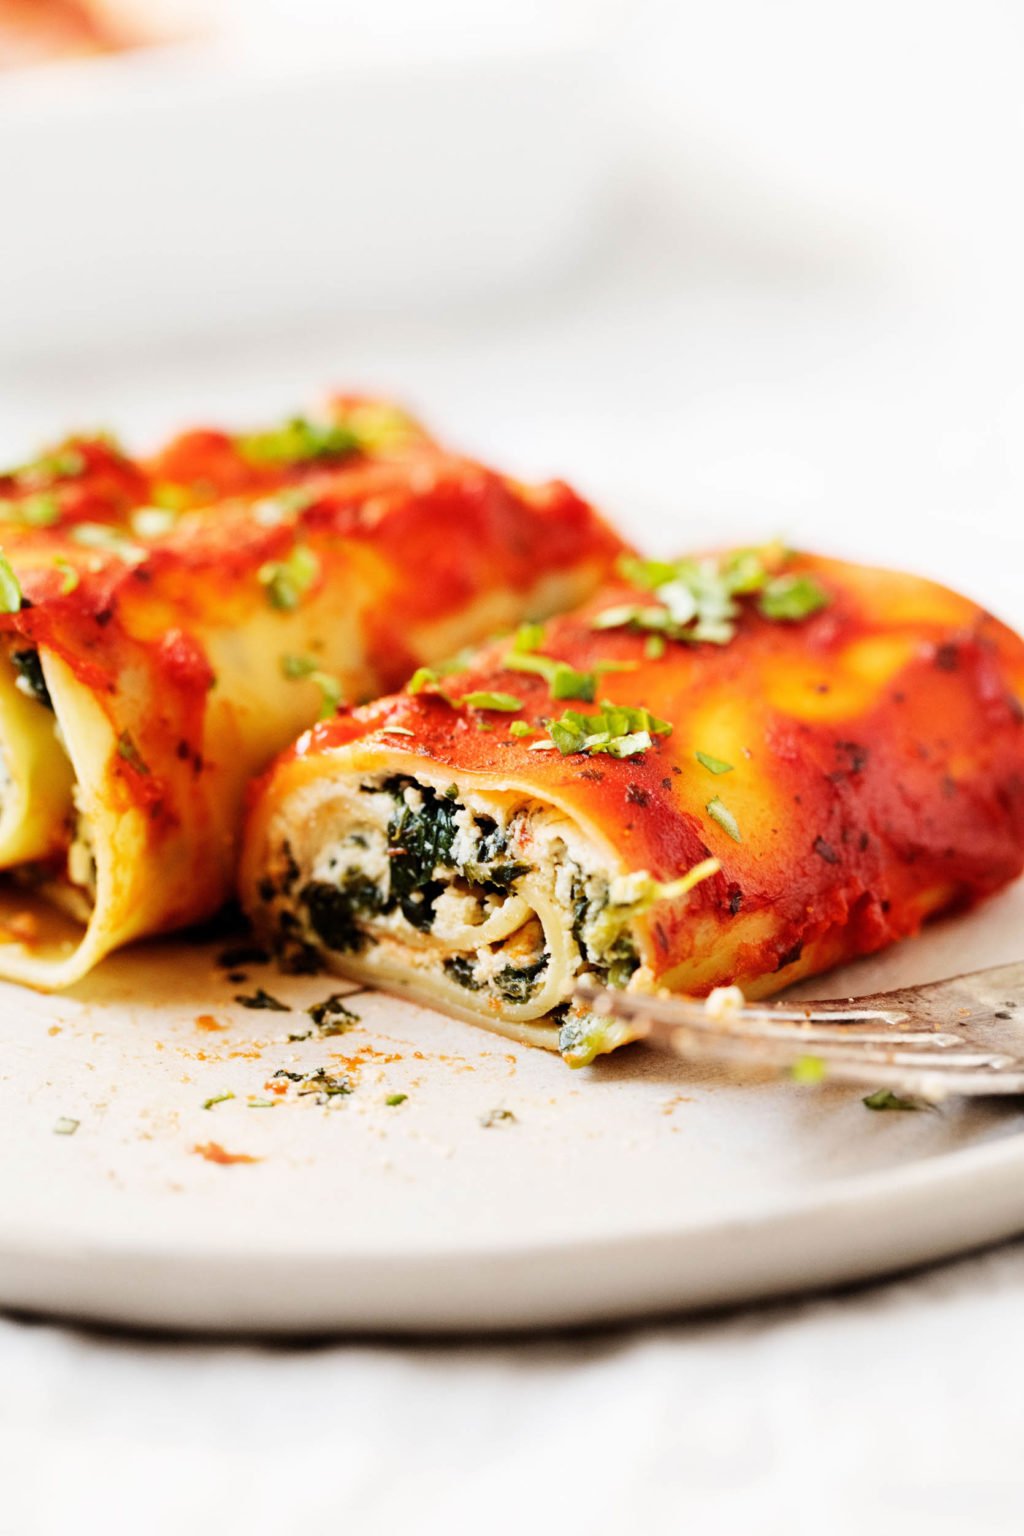 Two vegan spinach lasagna rolls sit on a dinner plate, ready to be eaten, with a fork nearby. One roll has been sliced into, revealing a creamy ricotta spinach interior.